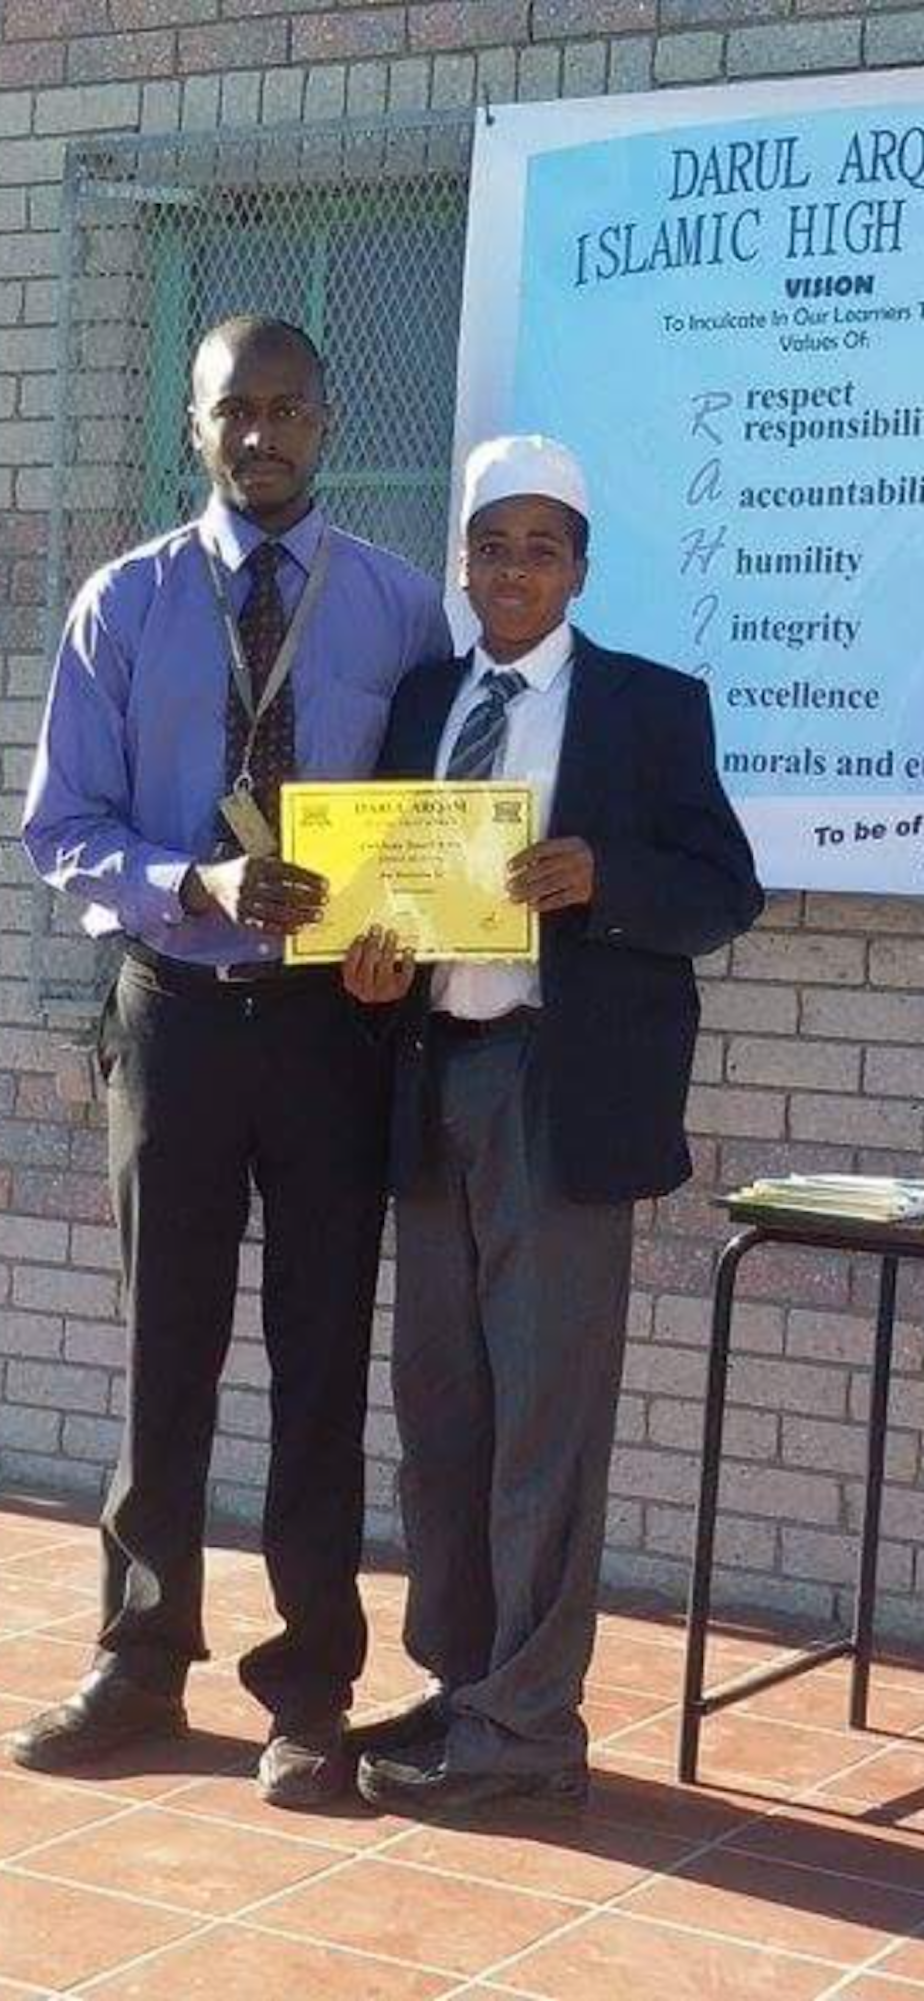 caption: Ahmed Ahmed (right) poses with his father at his 8th grade award ceremony in 2015 in Darul Arqam Islamic High School  in Cape Town, South Africa.